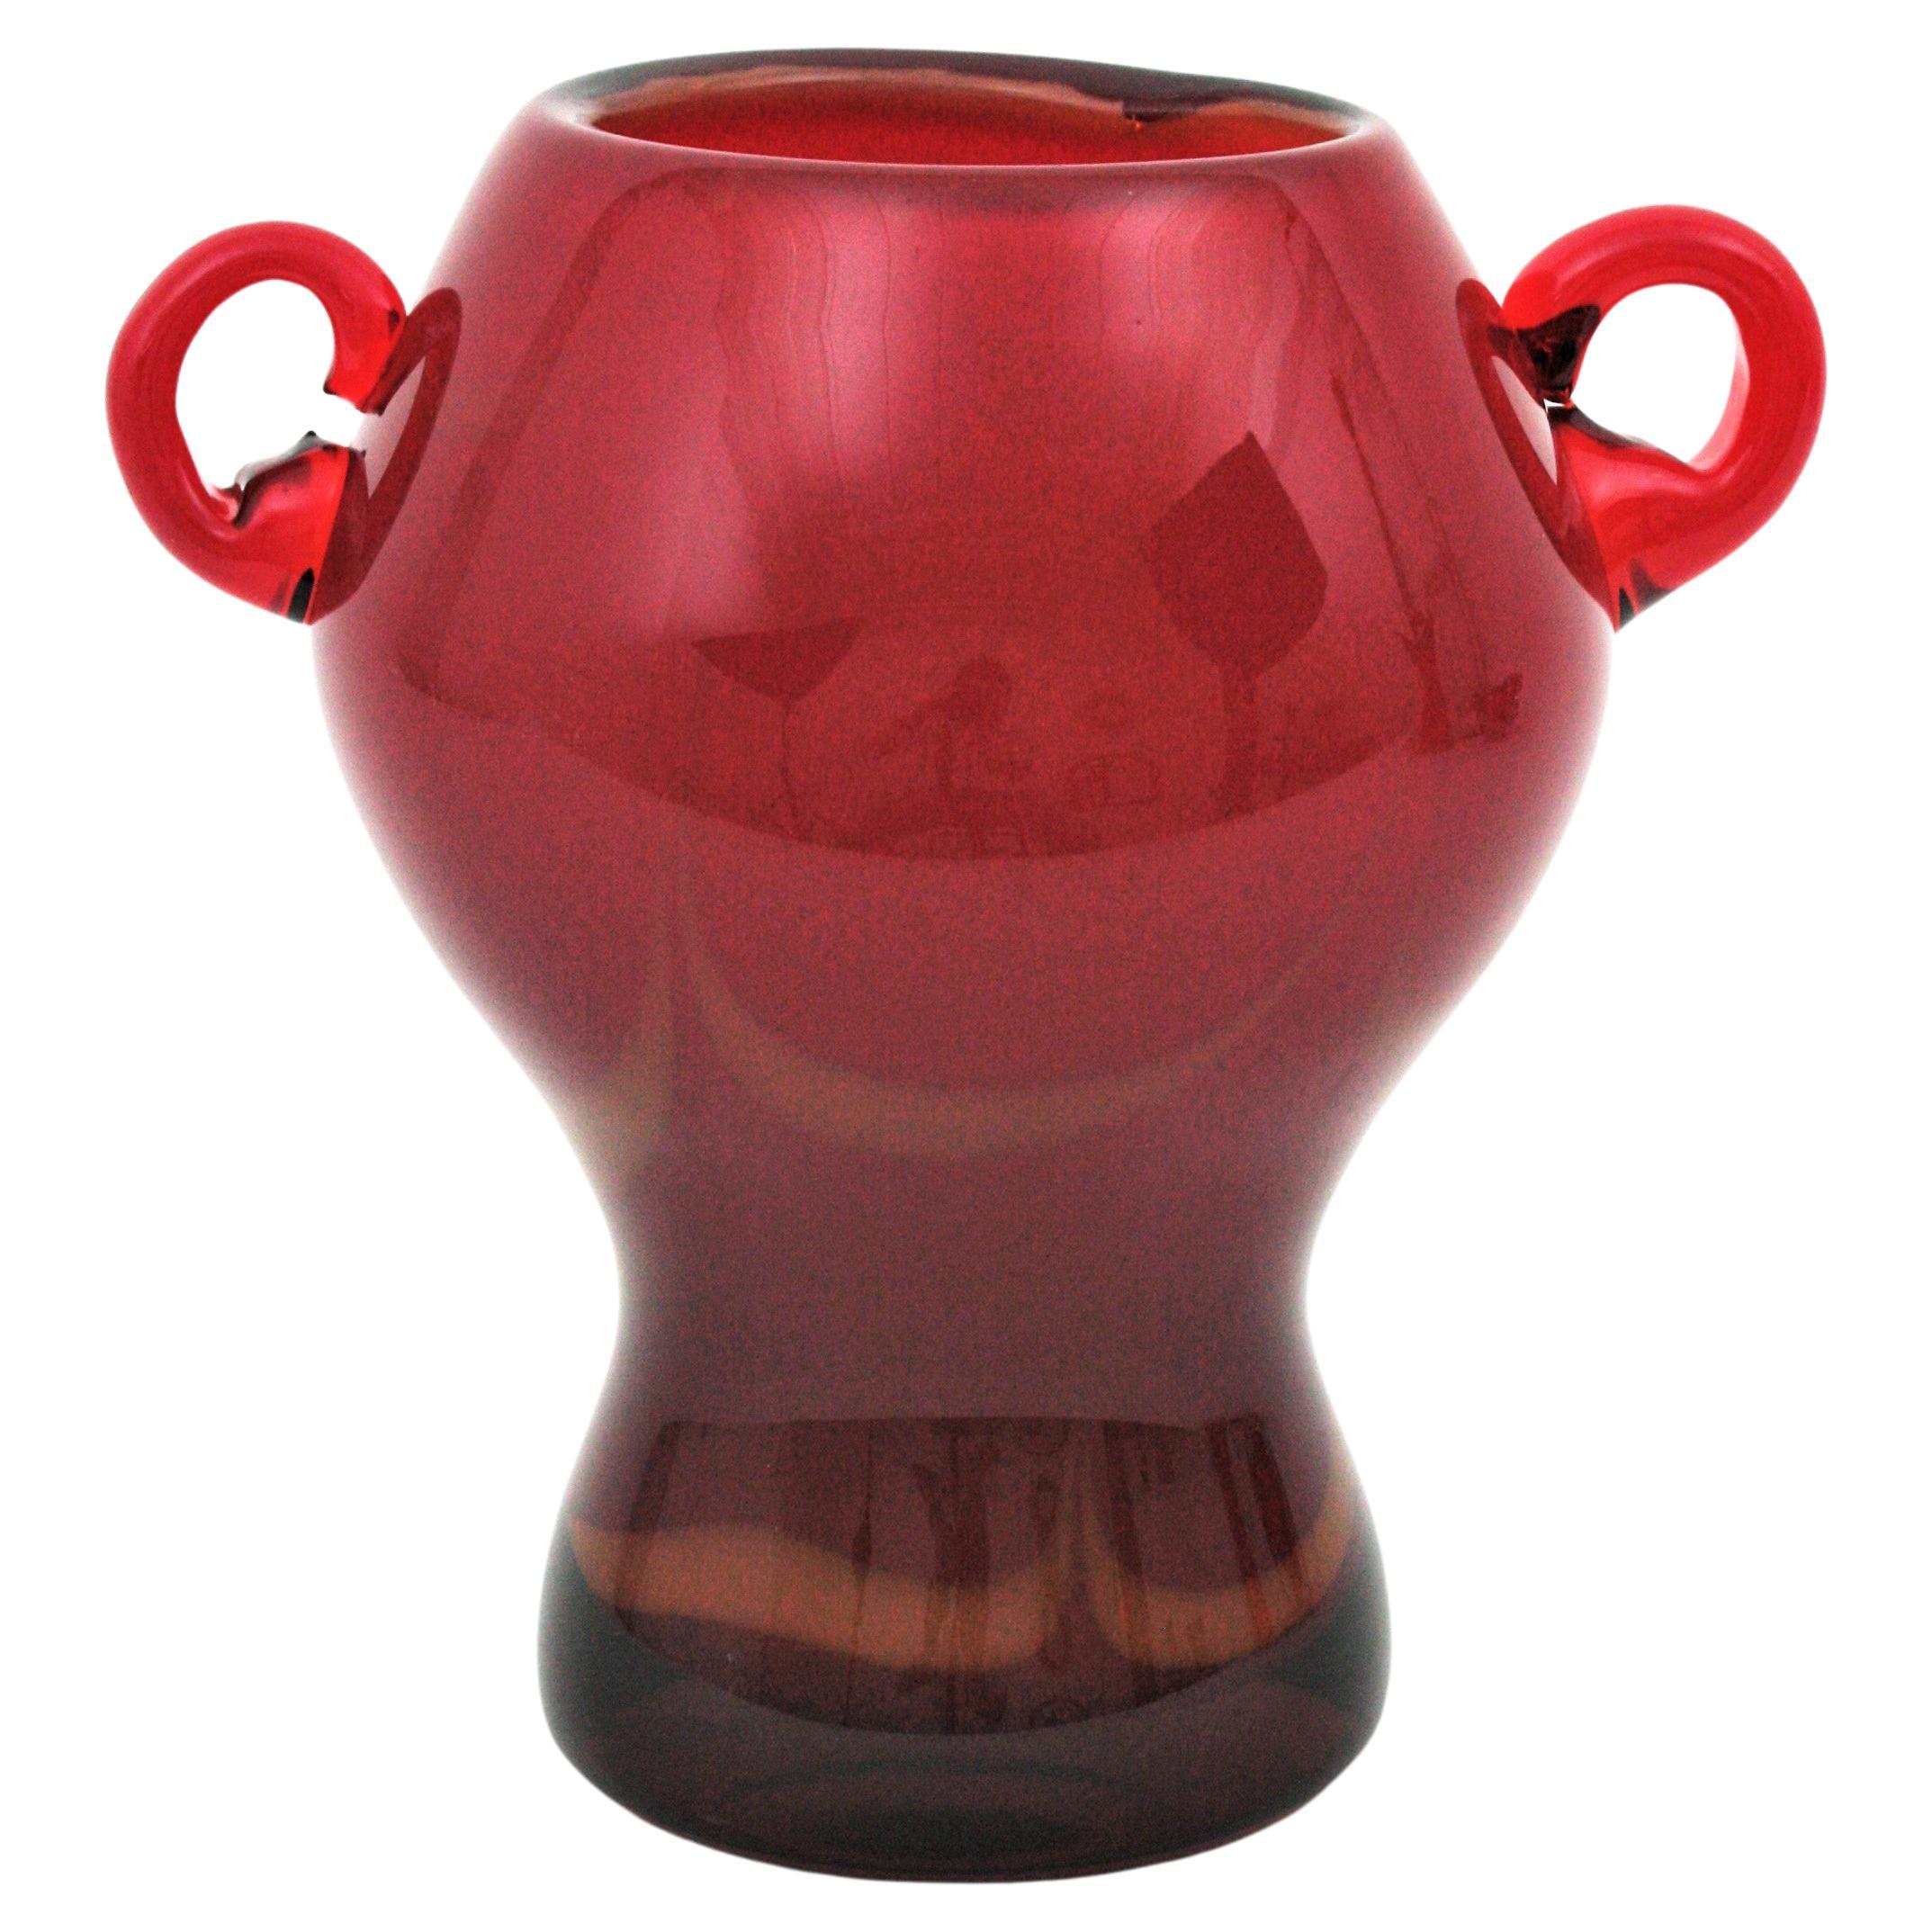 Hand blown Murano glass red vase with applied handles. Attributed to Archimede Seguso and Seguso Vetri d’Arte, Italy, 1950s.
This eye-catching Murano glass jar shaped vase is made with red glass and accented by toffee accents at the exterior part.